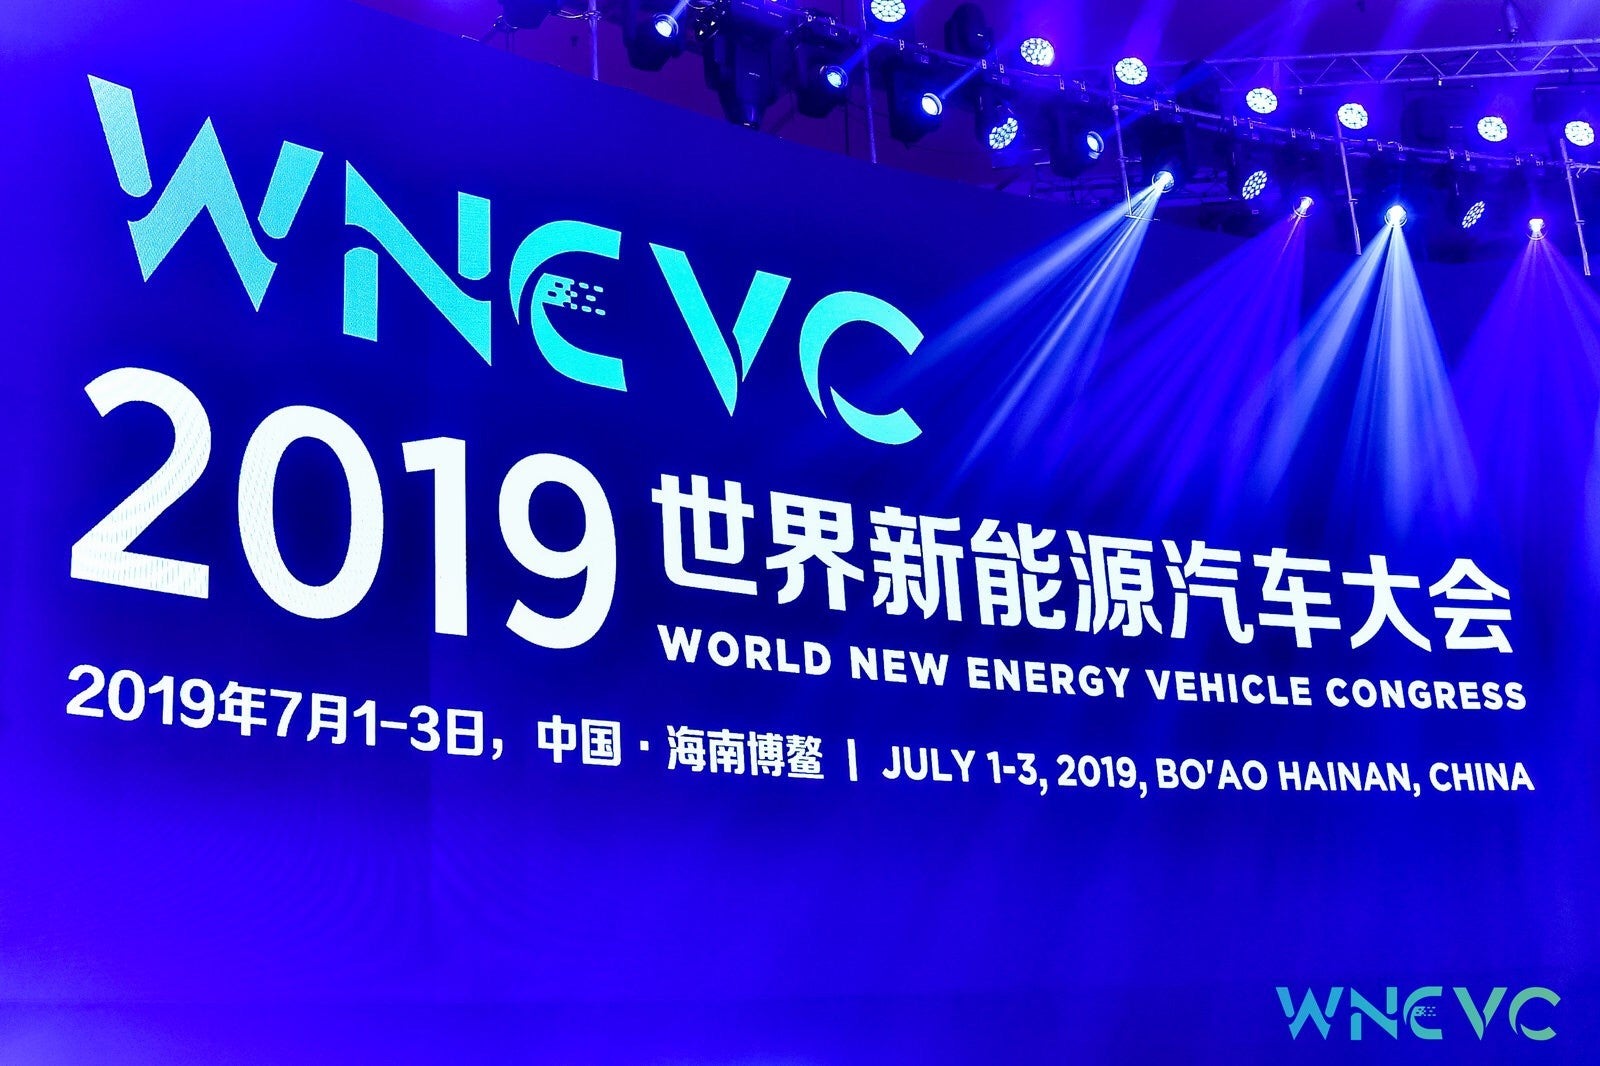 WNEVC 2019 stage banner